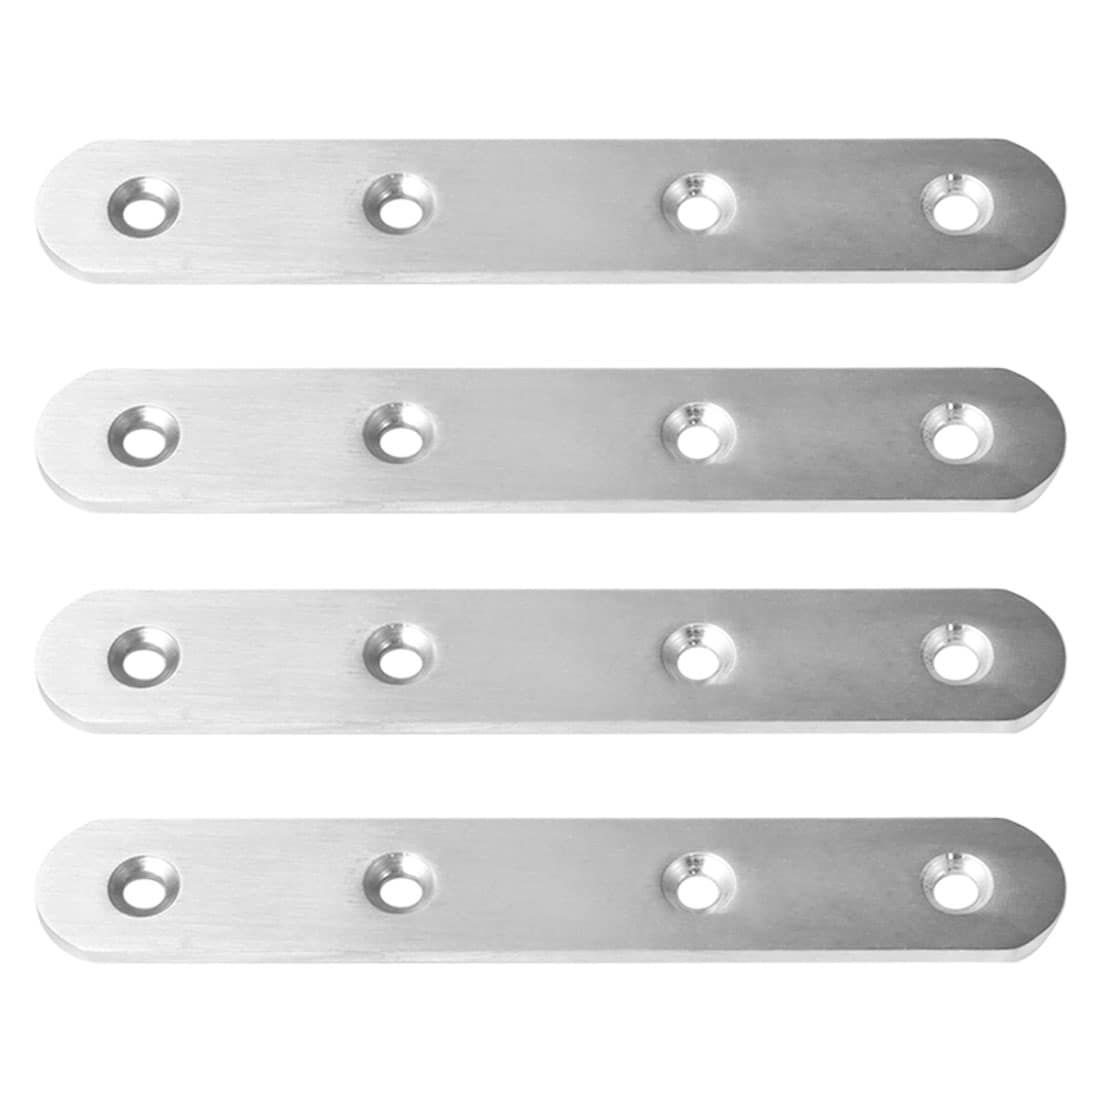 uxcell® 2pcs Straight Bracket Stainless Steel 100mm Flat Brace Fastener Brackets Corner Protector Support w Screws for Furniture 